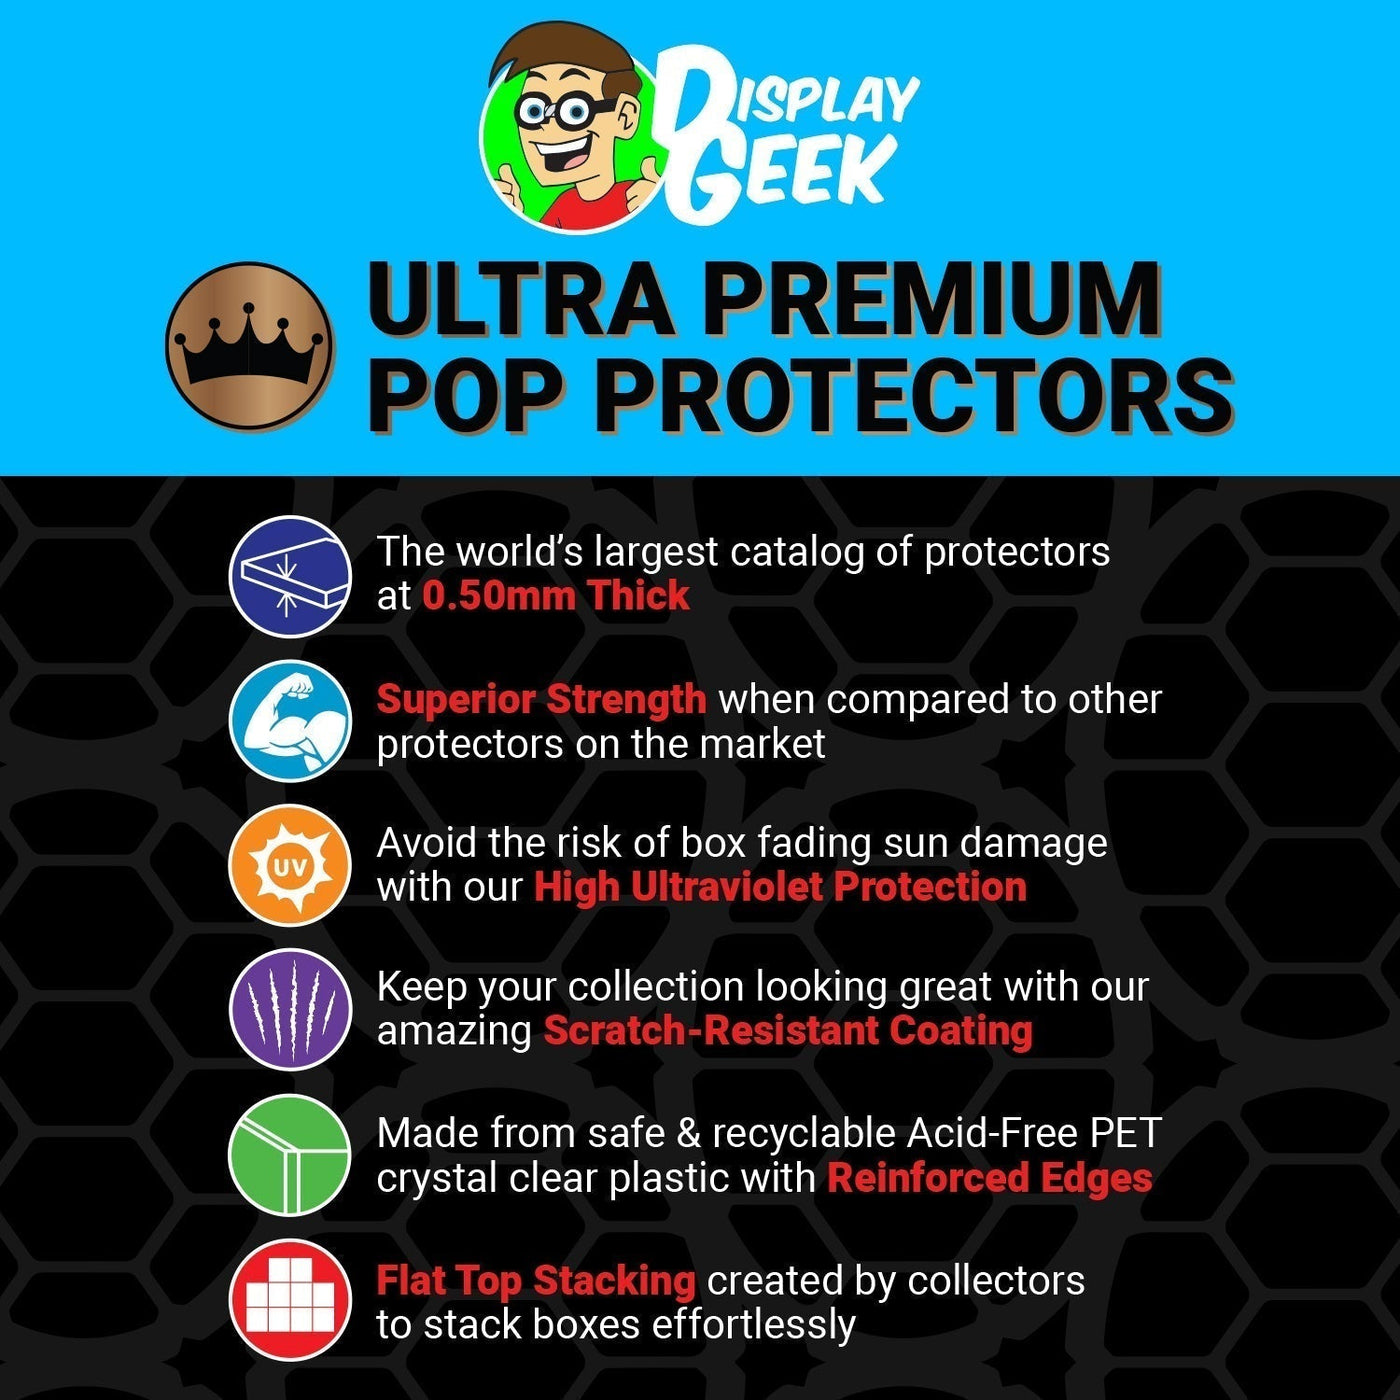 Pop Protector for Hakuna Matata #1313 Funko Pop Moment on The Protector Guide App by Display Geek